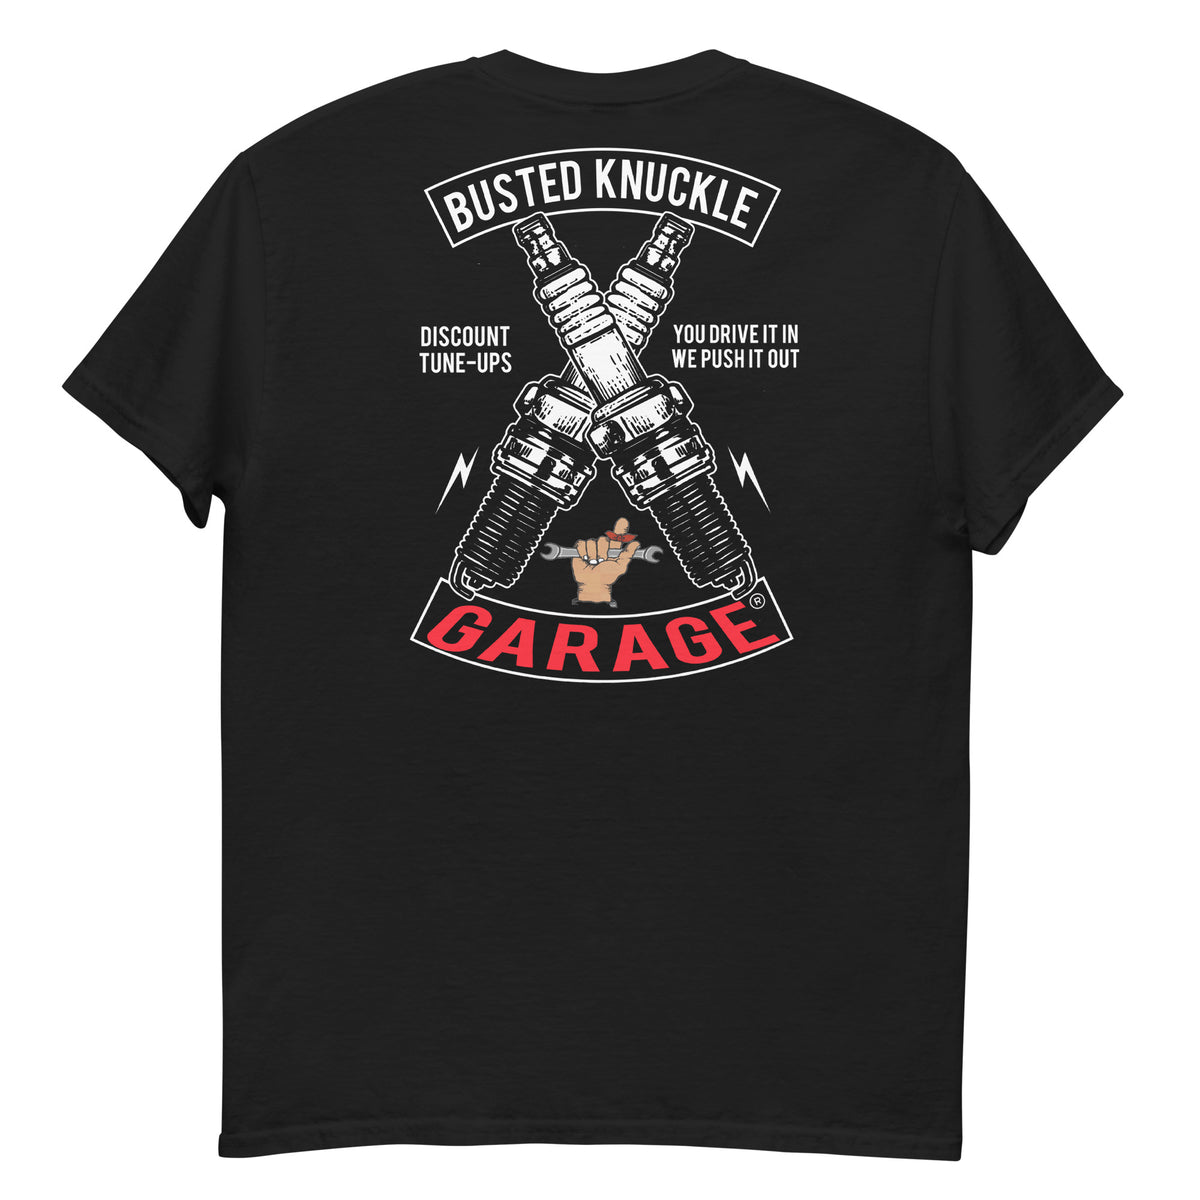 Busted Knuckle Garage Two Sided Tune-Up T-Shirt